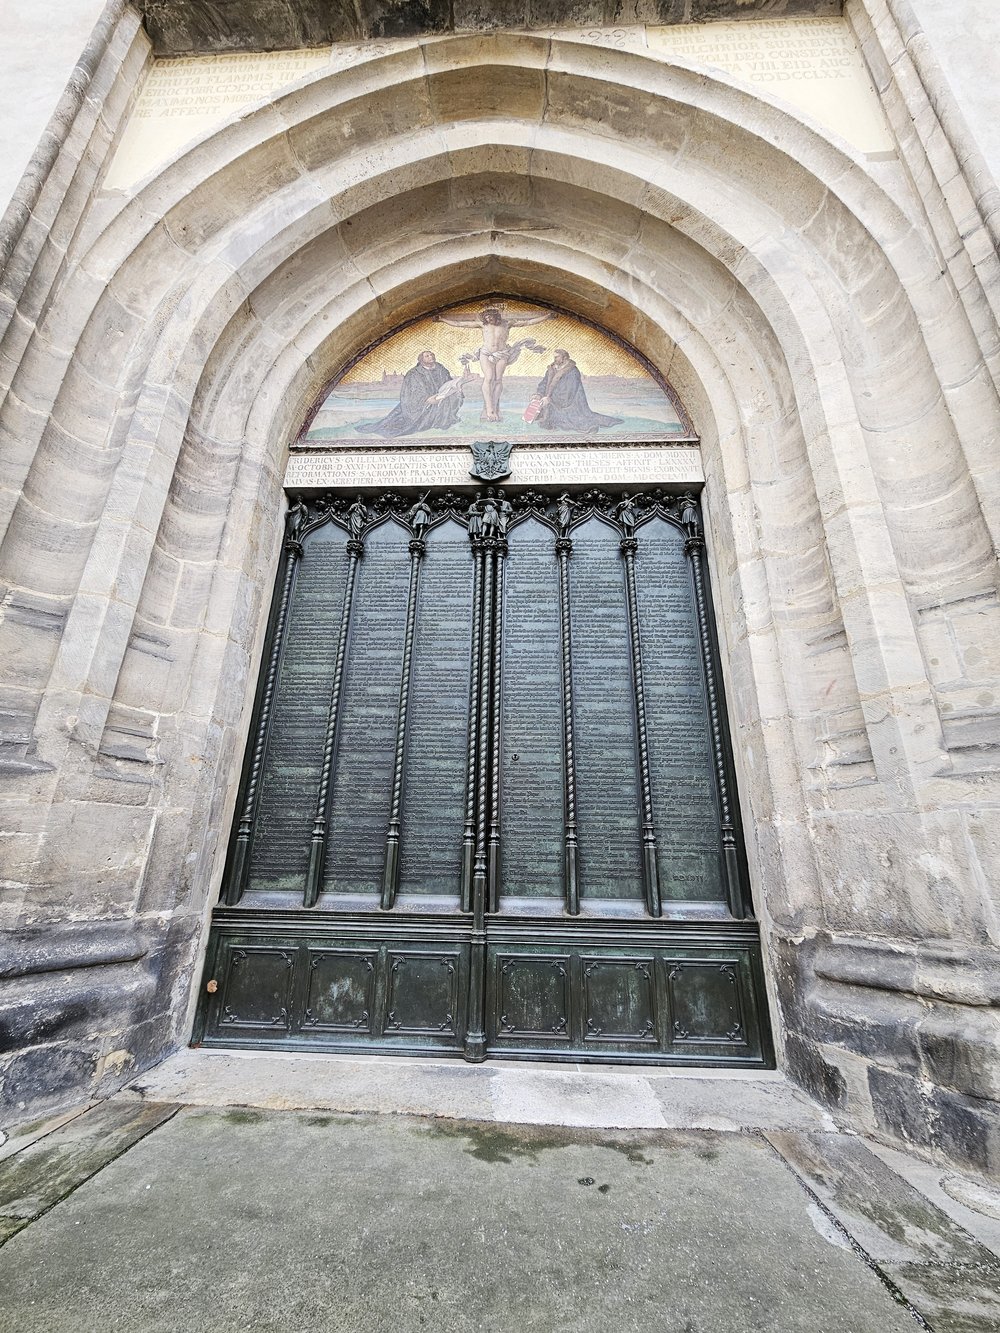 The famous doors of the church